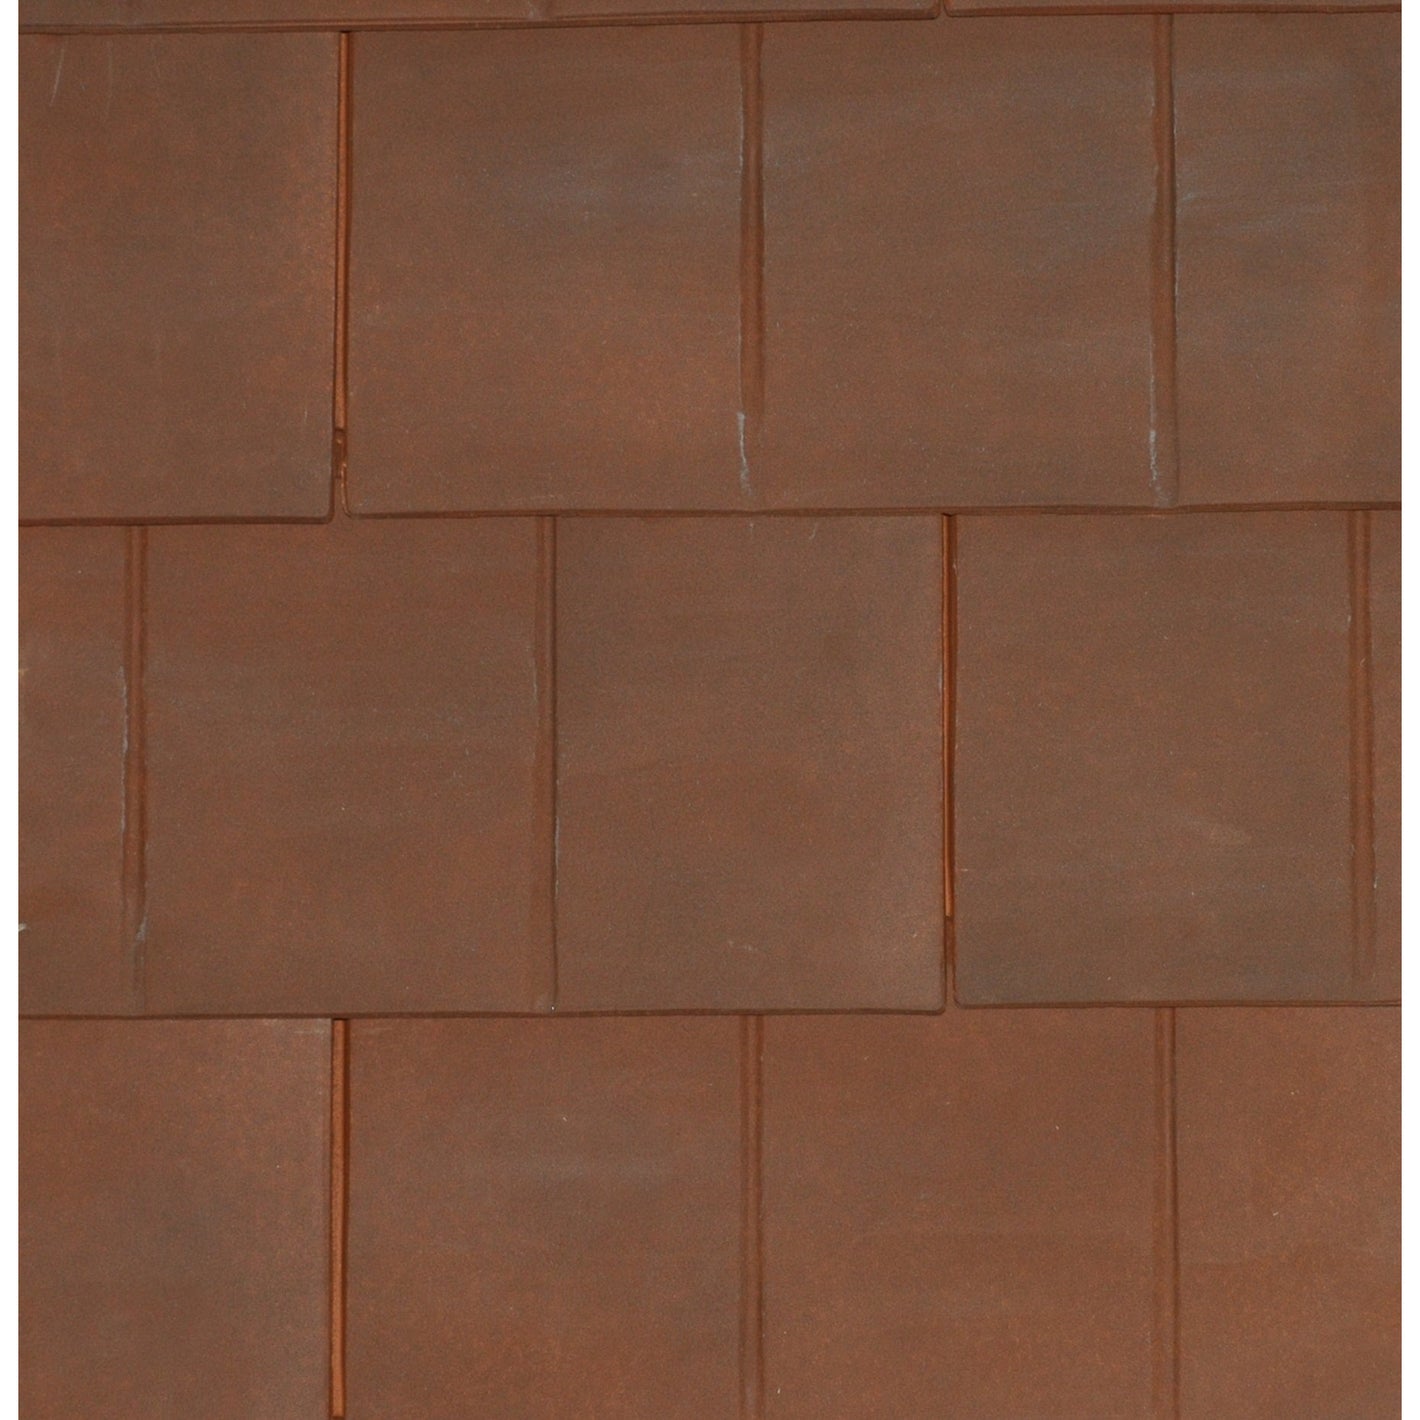 VISUM 3 Clay Interlocking Low Pitch Plain Tile 24° - Rustic Red Smooth